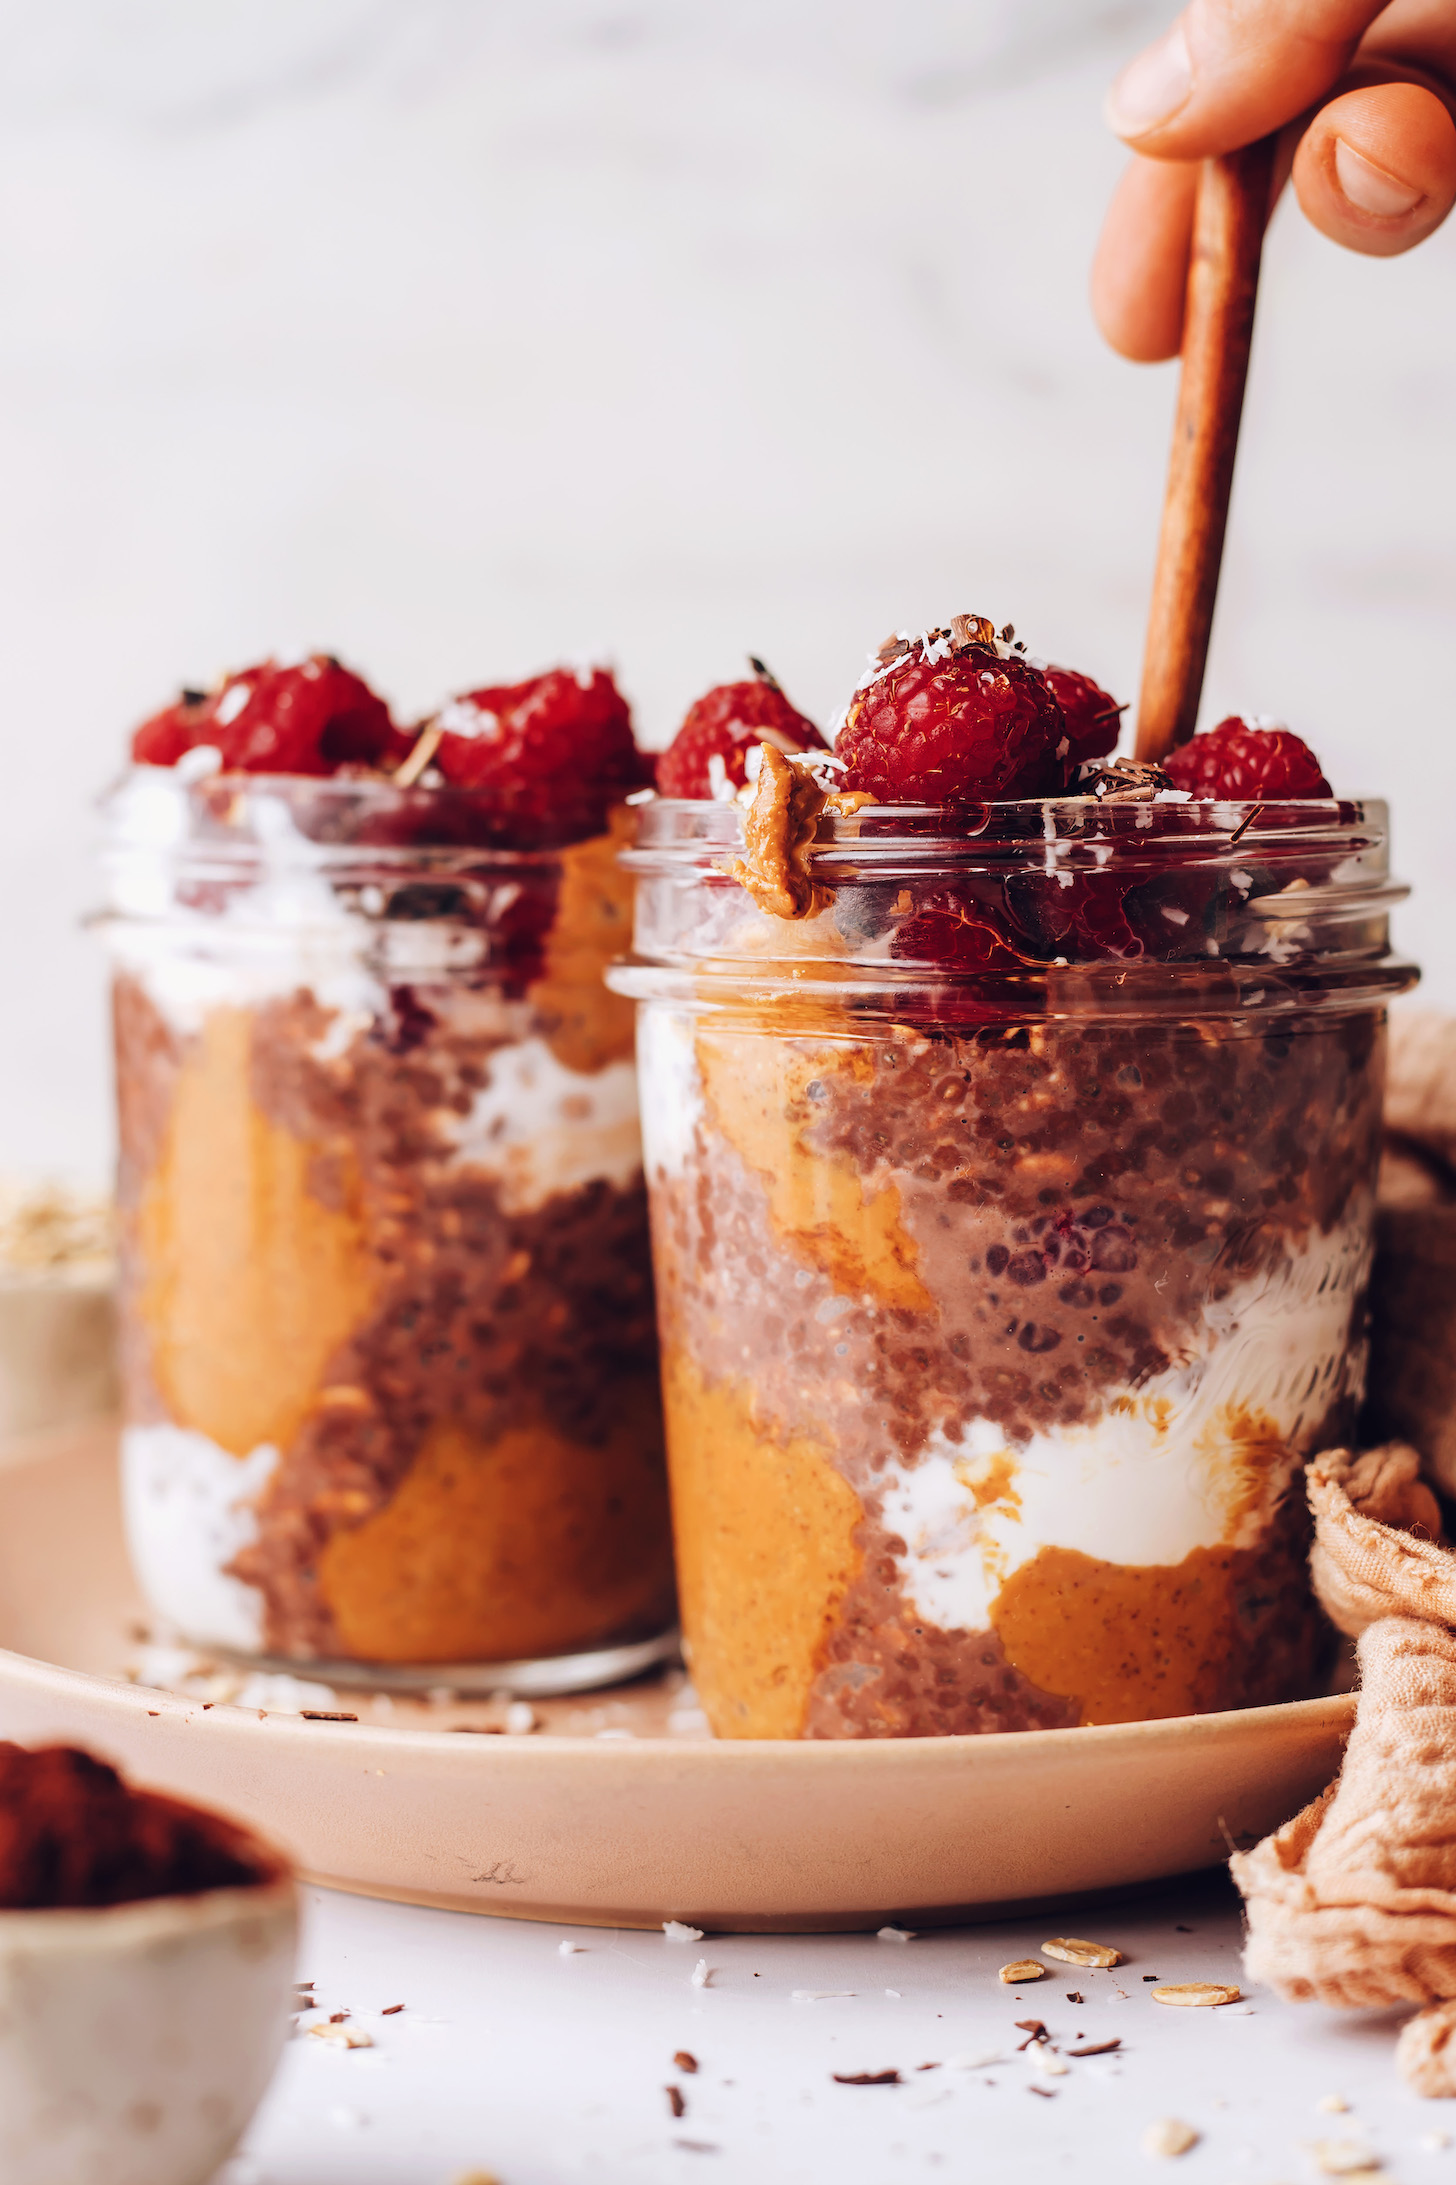 Holding a spoon in a jar of vegan chocolate overnight oats